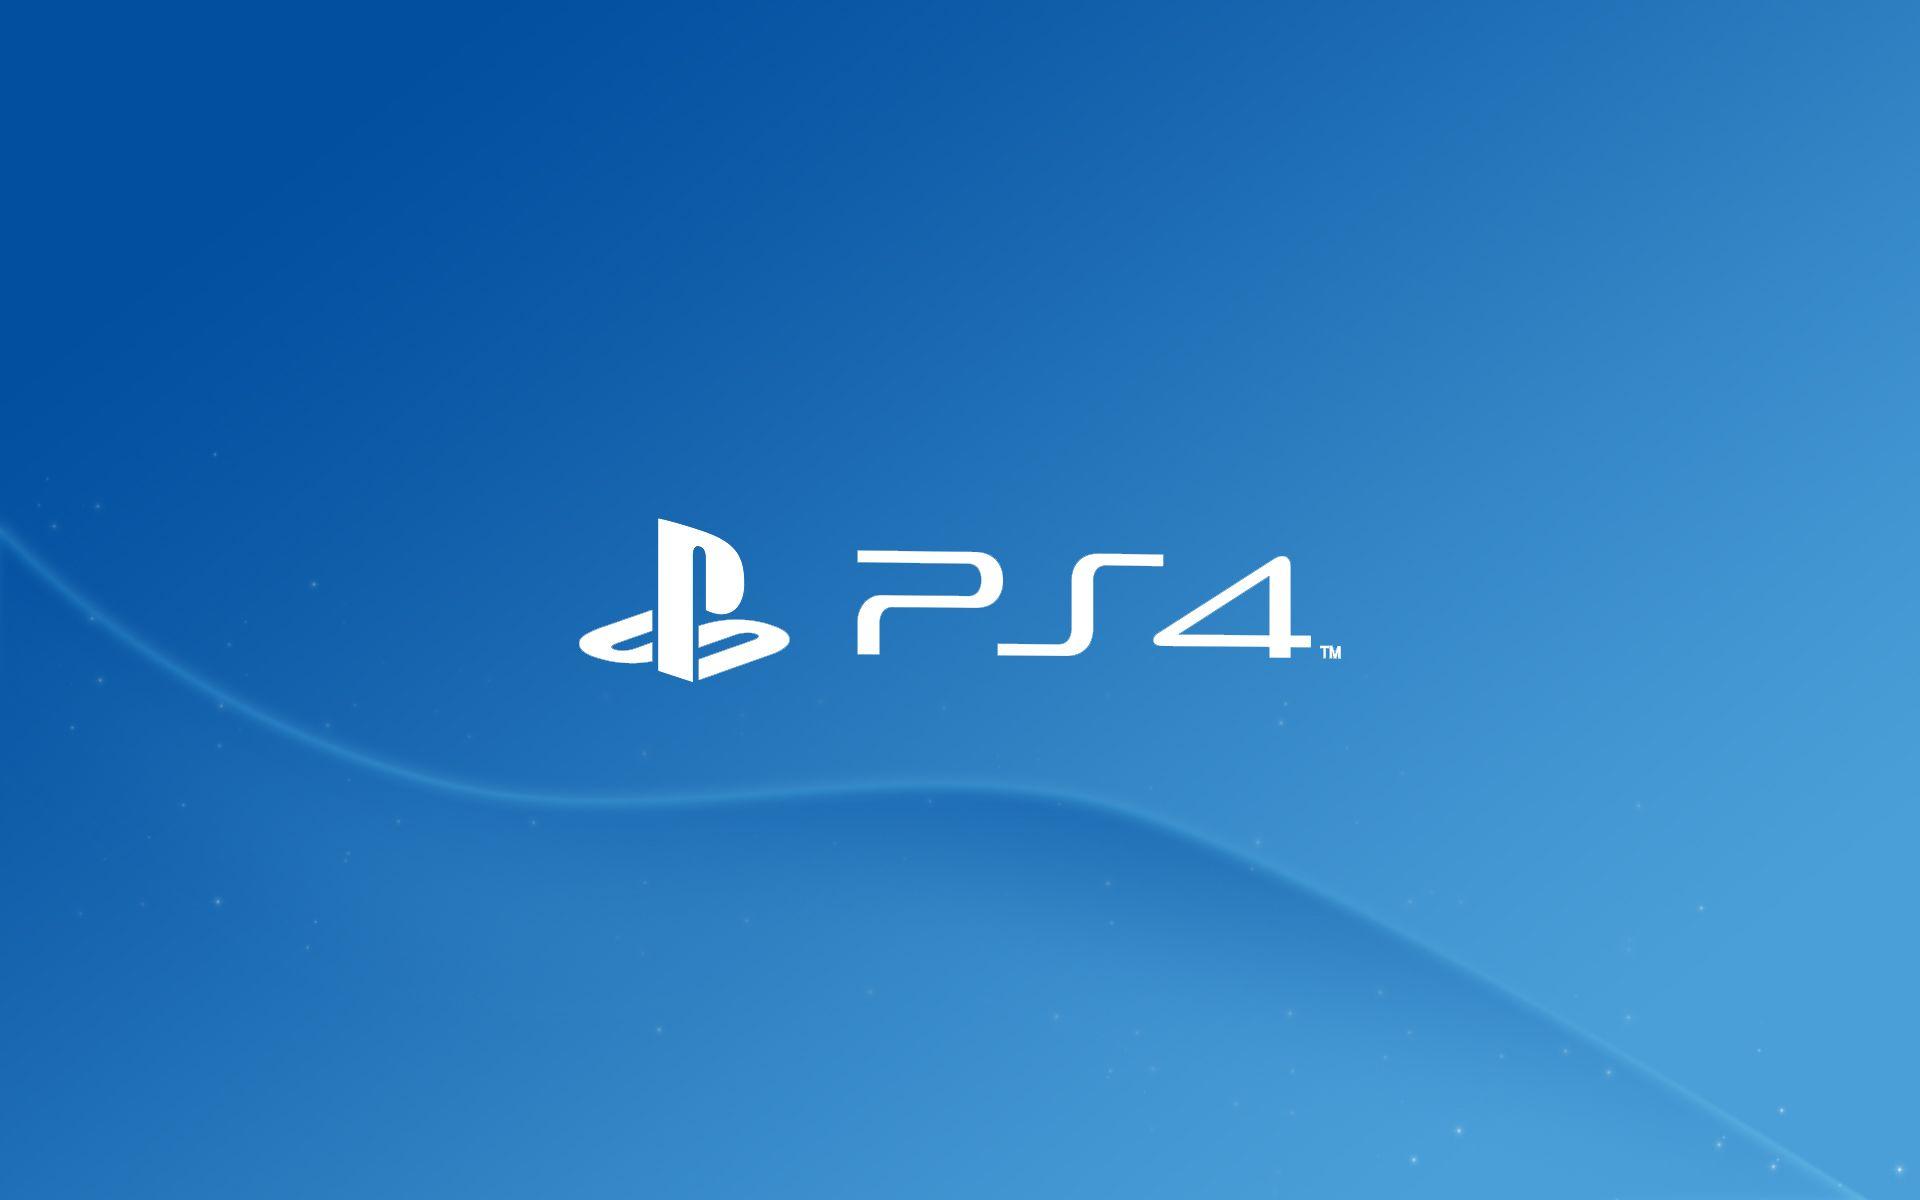 Sony PlayStation 4 Logo - Sony ‑ PlayStation 4 Wallpapers - Wallpaper Cave